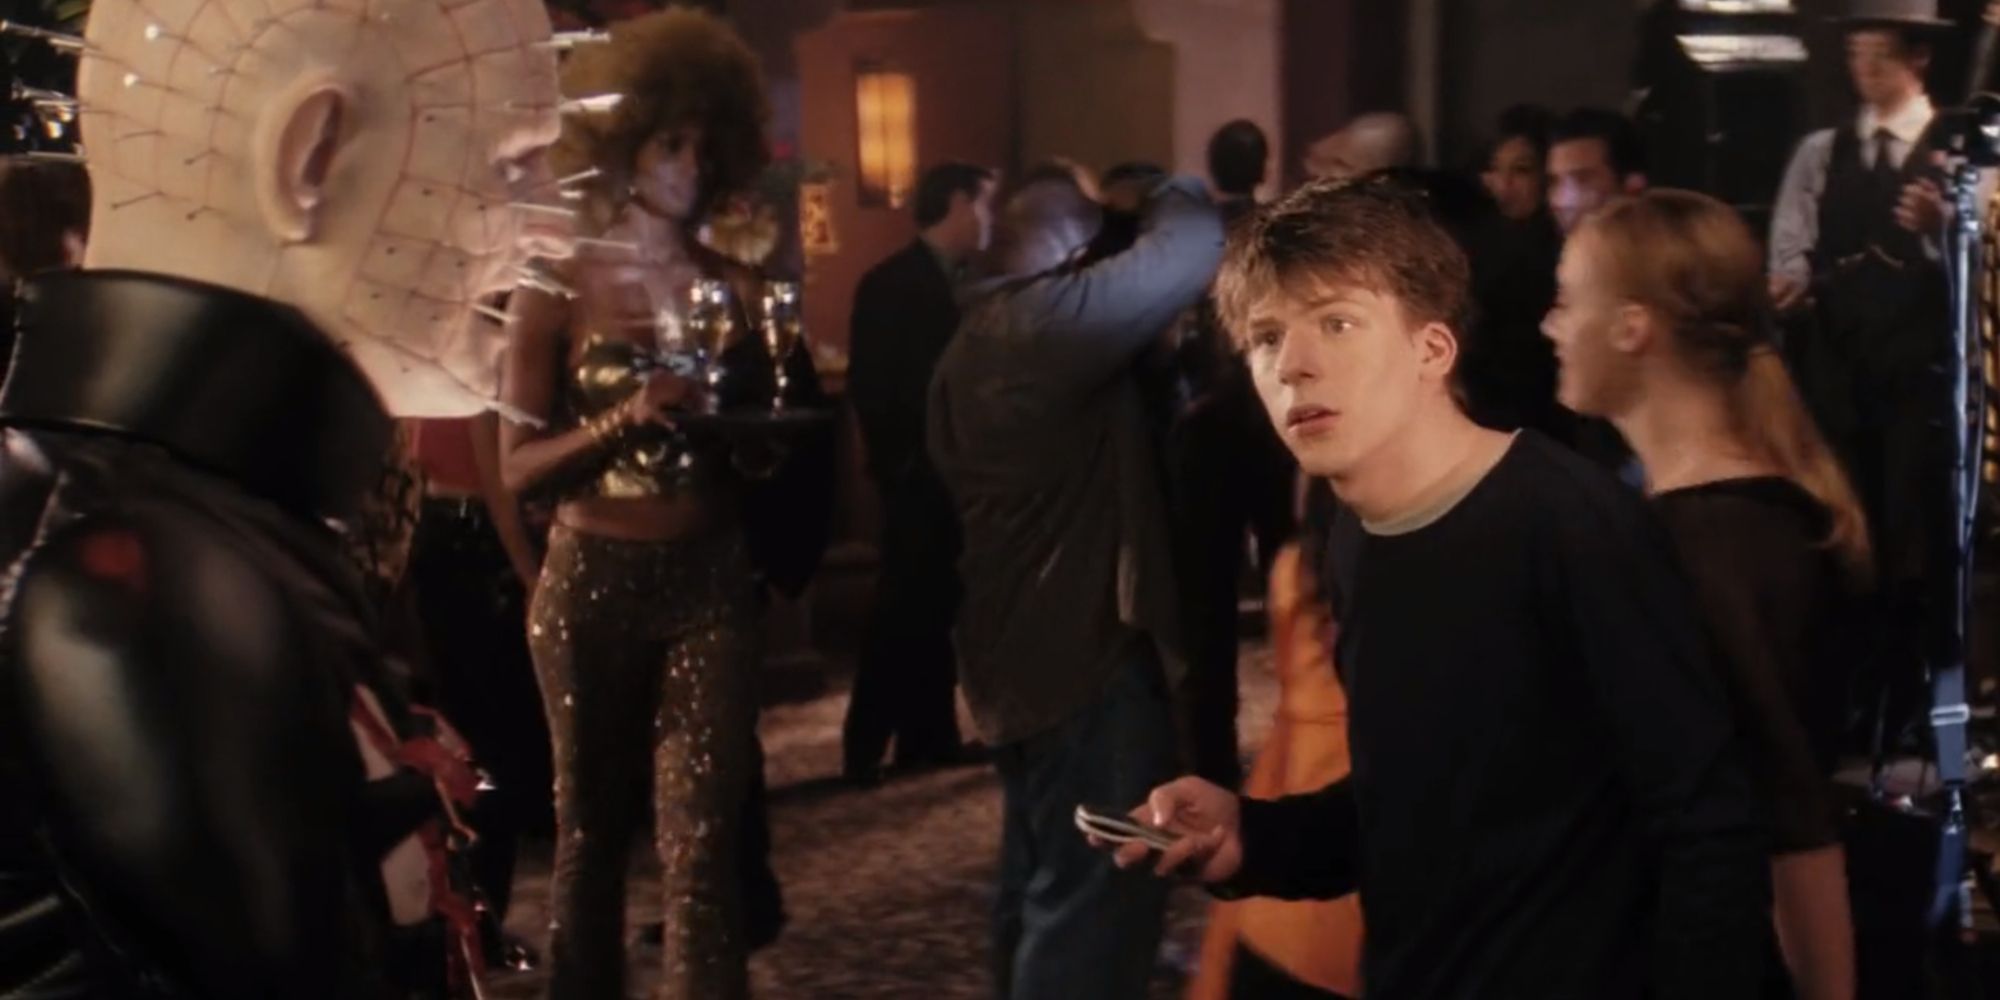 Jimmy spotting a Pinhead statue in the Tinsel nightclub in Wes Craven's Cursed (2005)